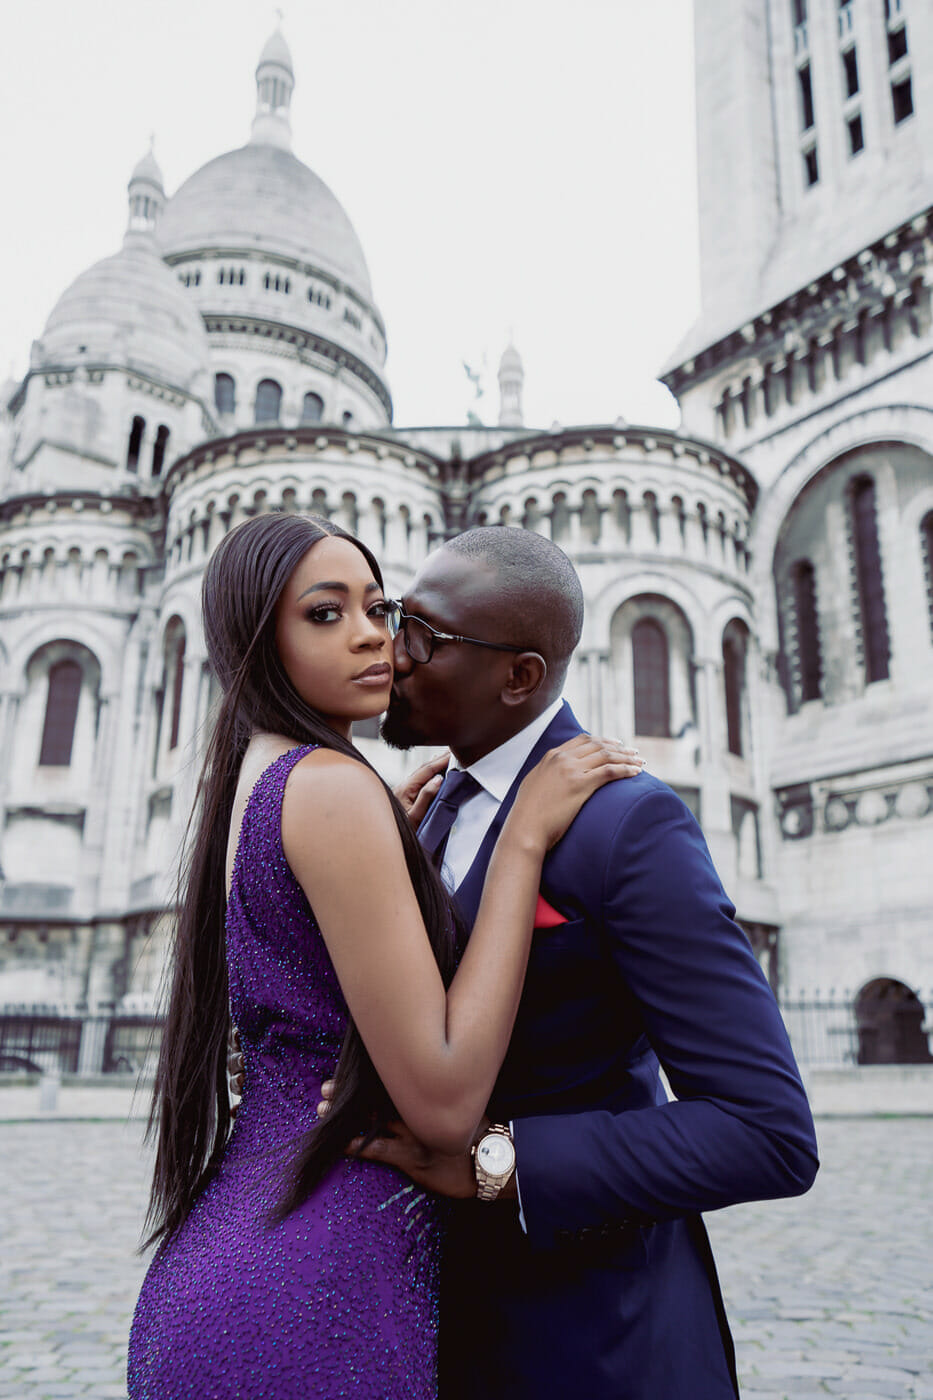 Couple photoshoot at Montmartre with Sacre Coeur as backdrop